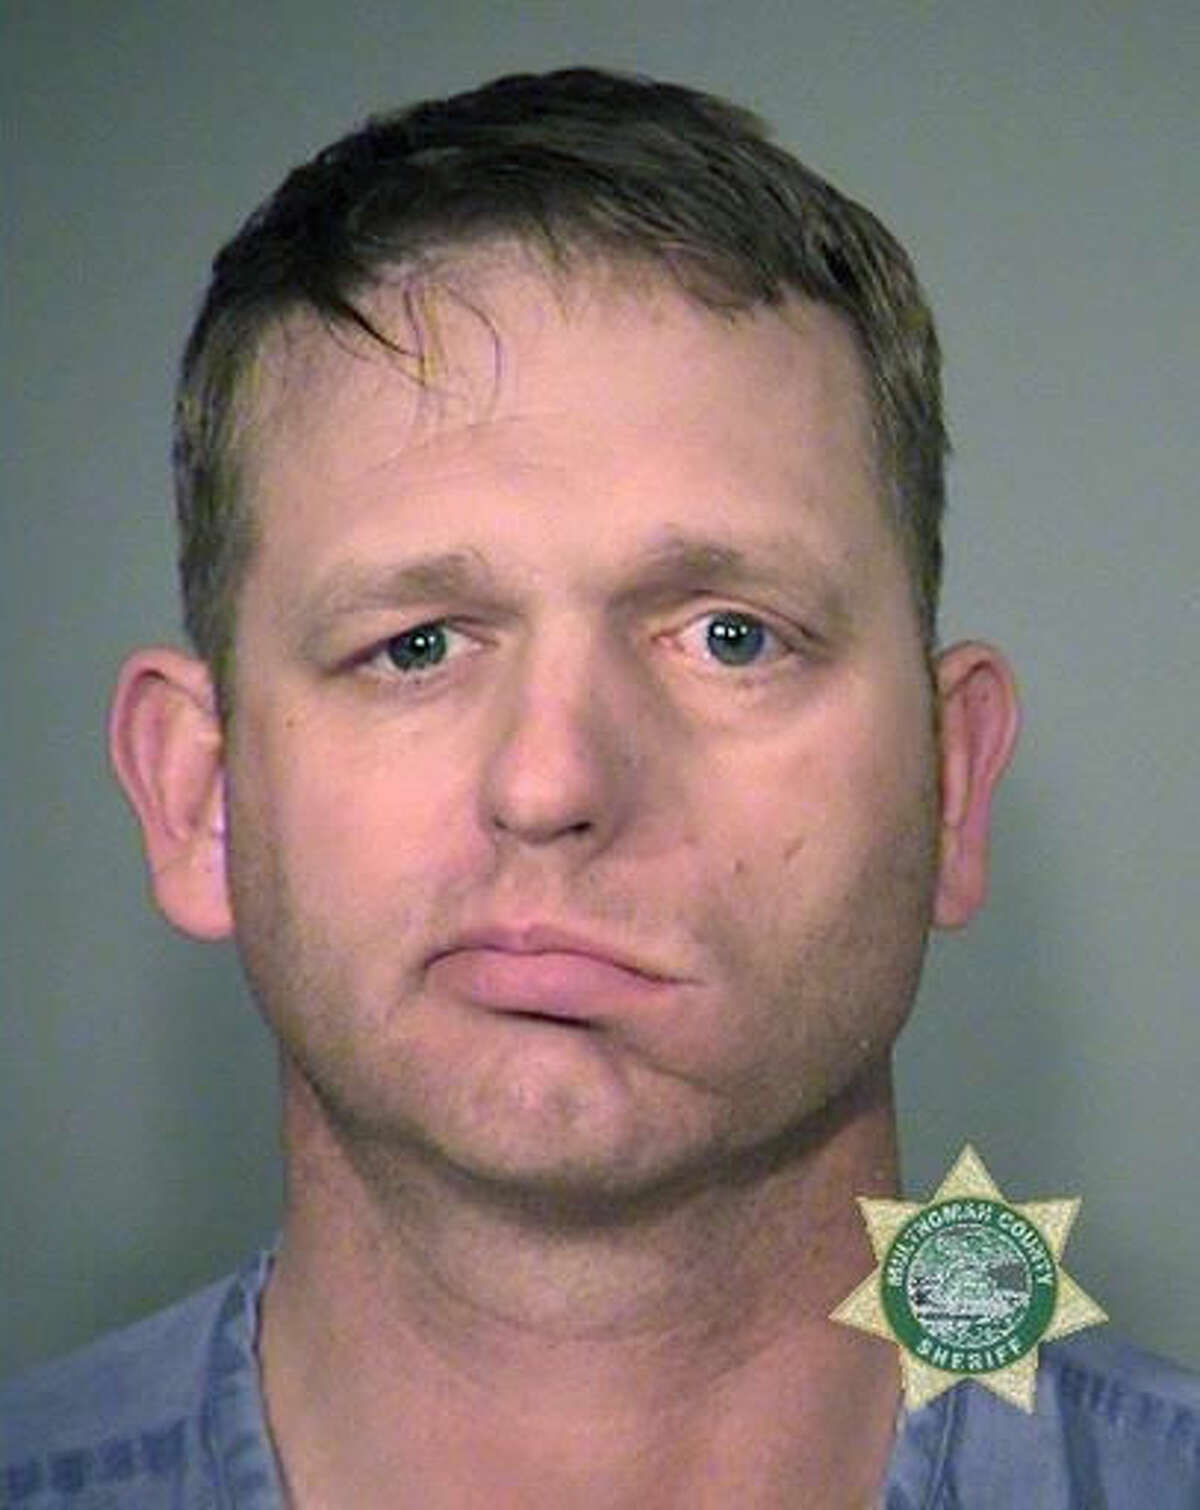 FILE - This Jan. 27, 2016, file photo provided by the Multnomah County Sheriff's Office, shows Ryan Bundy, who is in custody over the armed occupation of an Oregon bird sanctuary. Bundy was involved in an altercation with deputies in Portland, Ore., Tuesday, Aug. 9, 2016, when he refused to be handcuffed for transport. (Multnomah County Sheriff via AP, file)